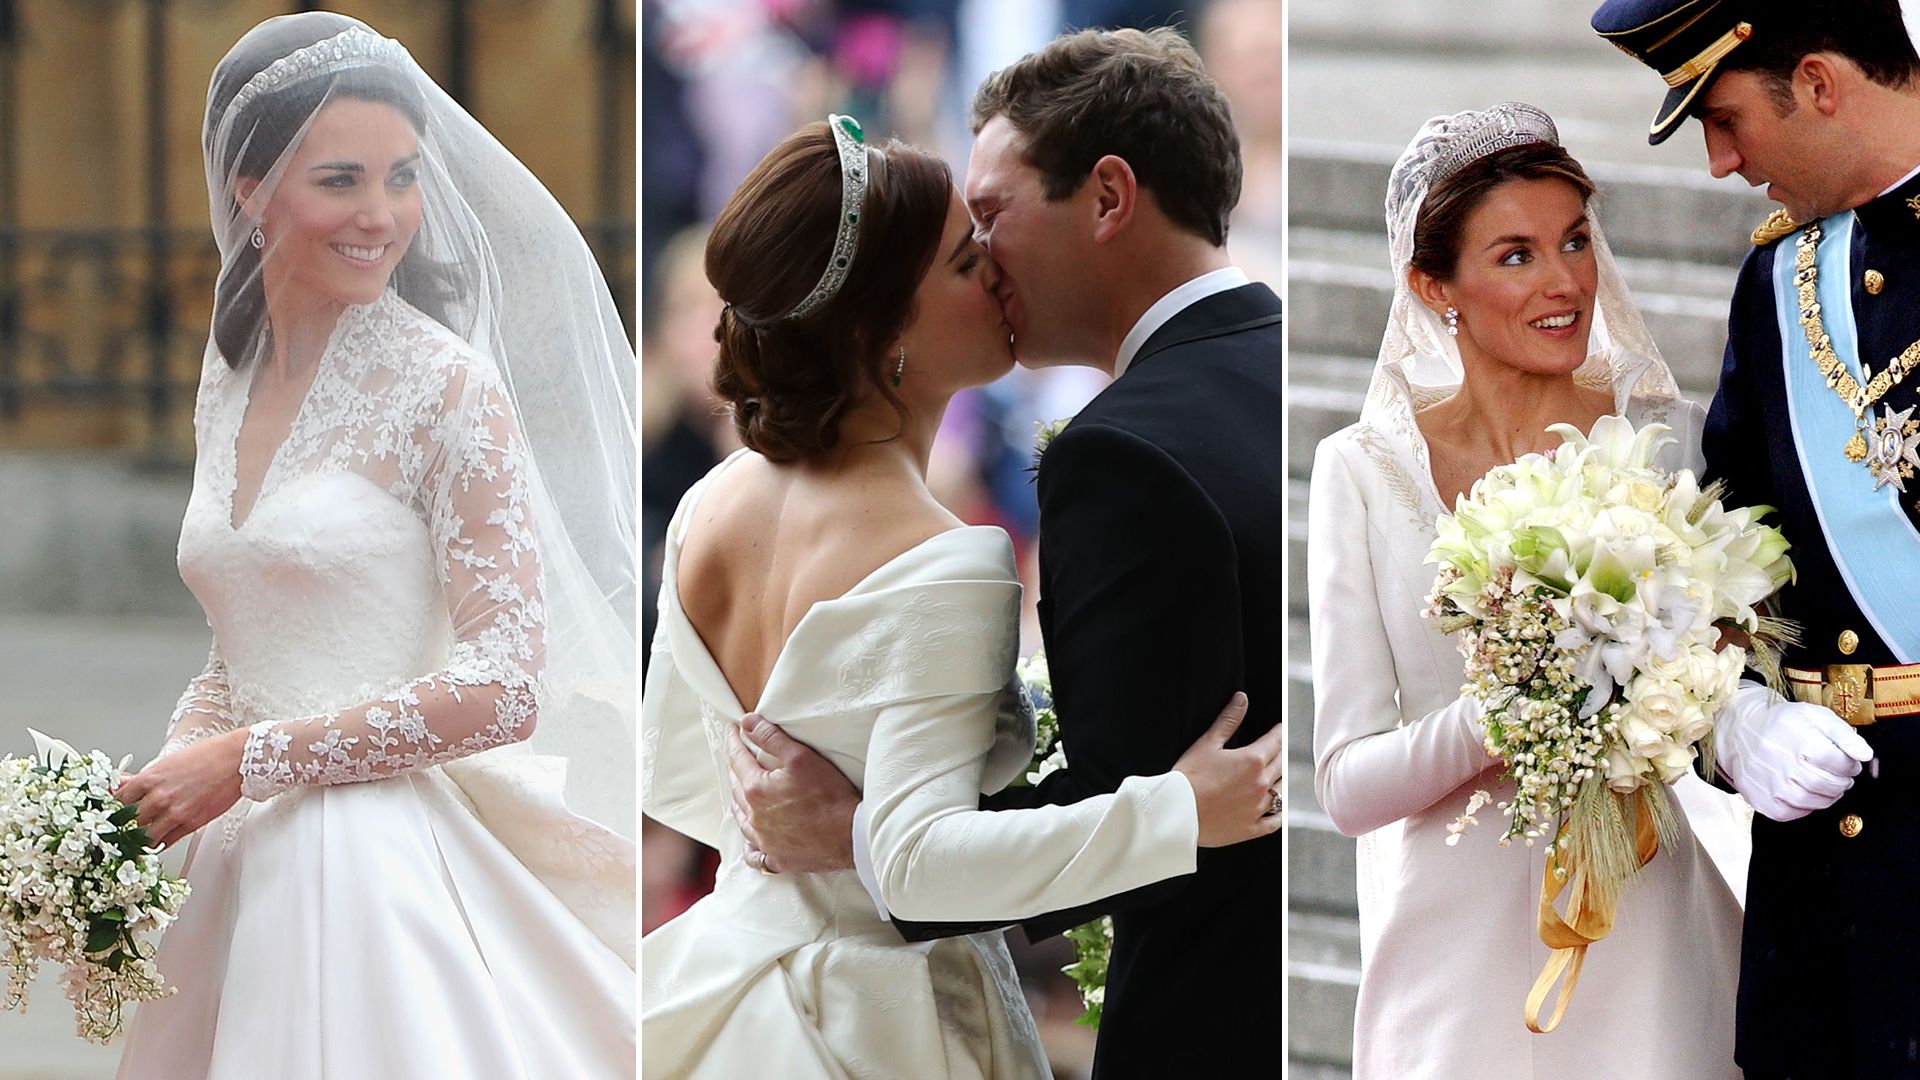 Royal wedding dresses: hidden meanings in Princess Eugenie and